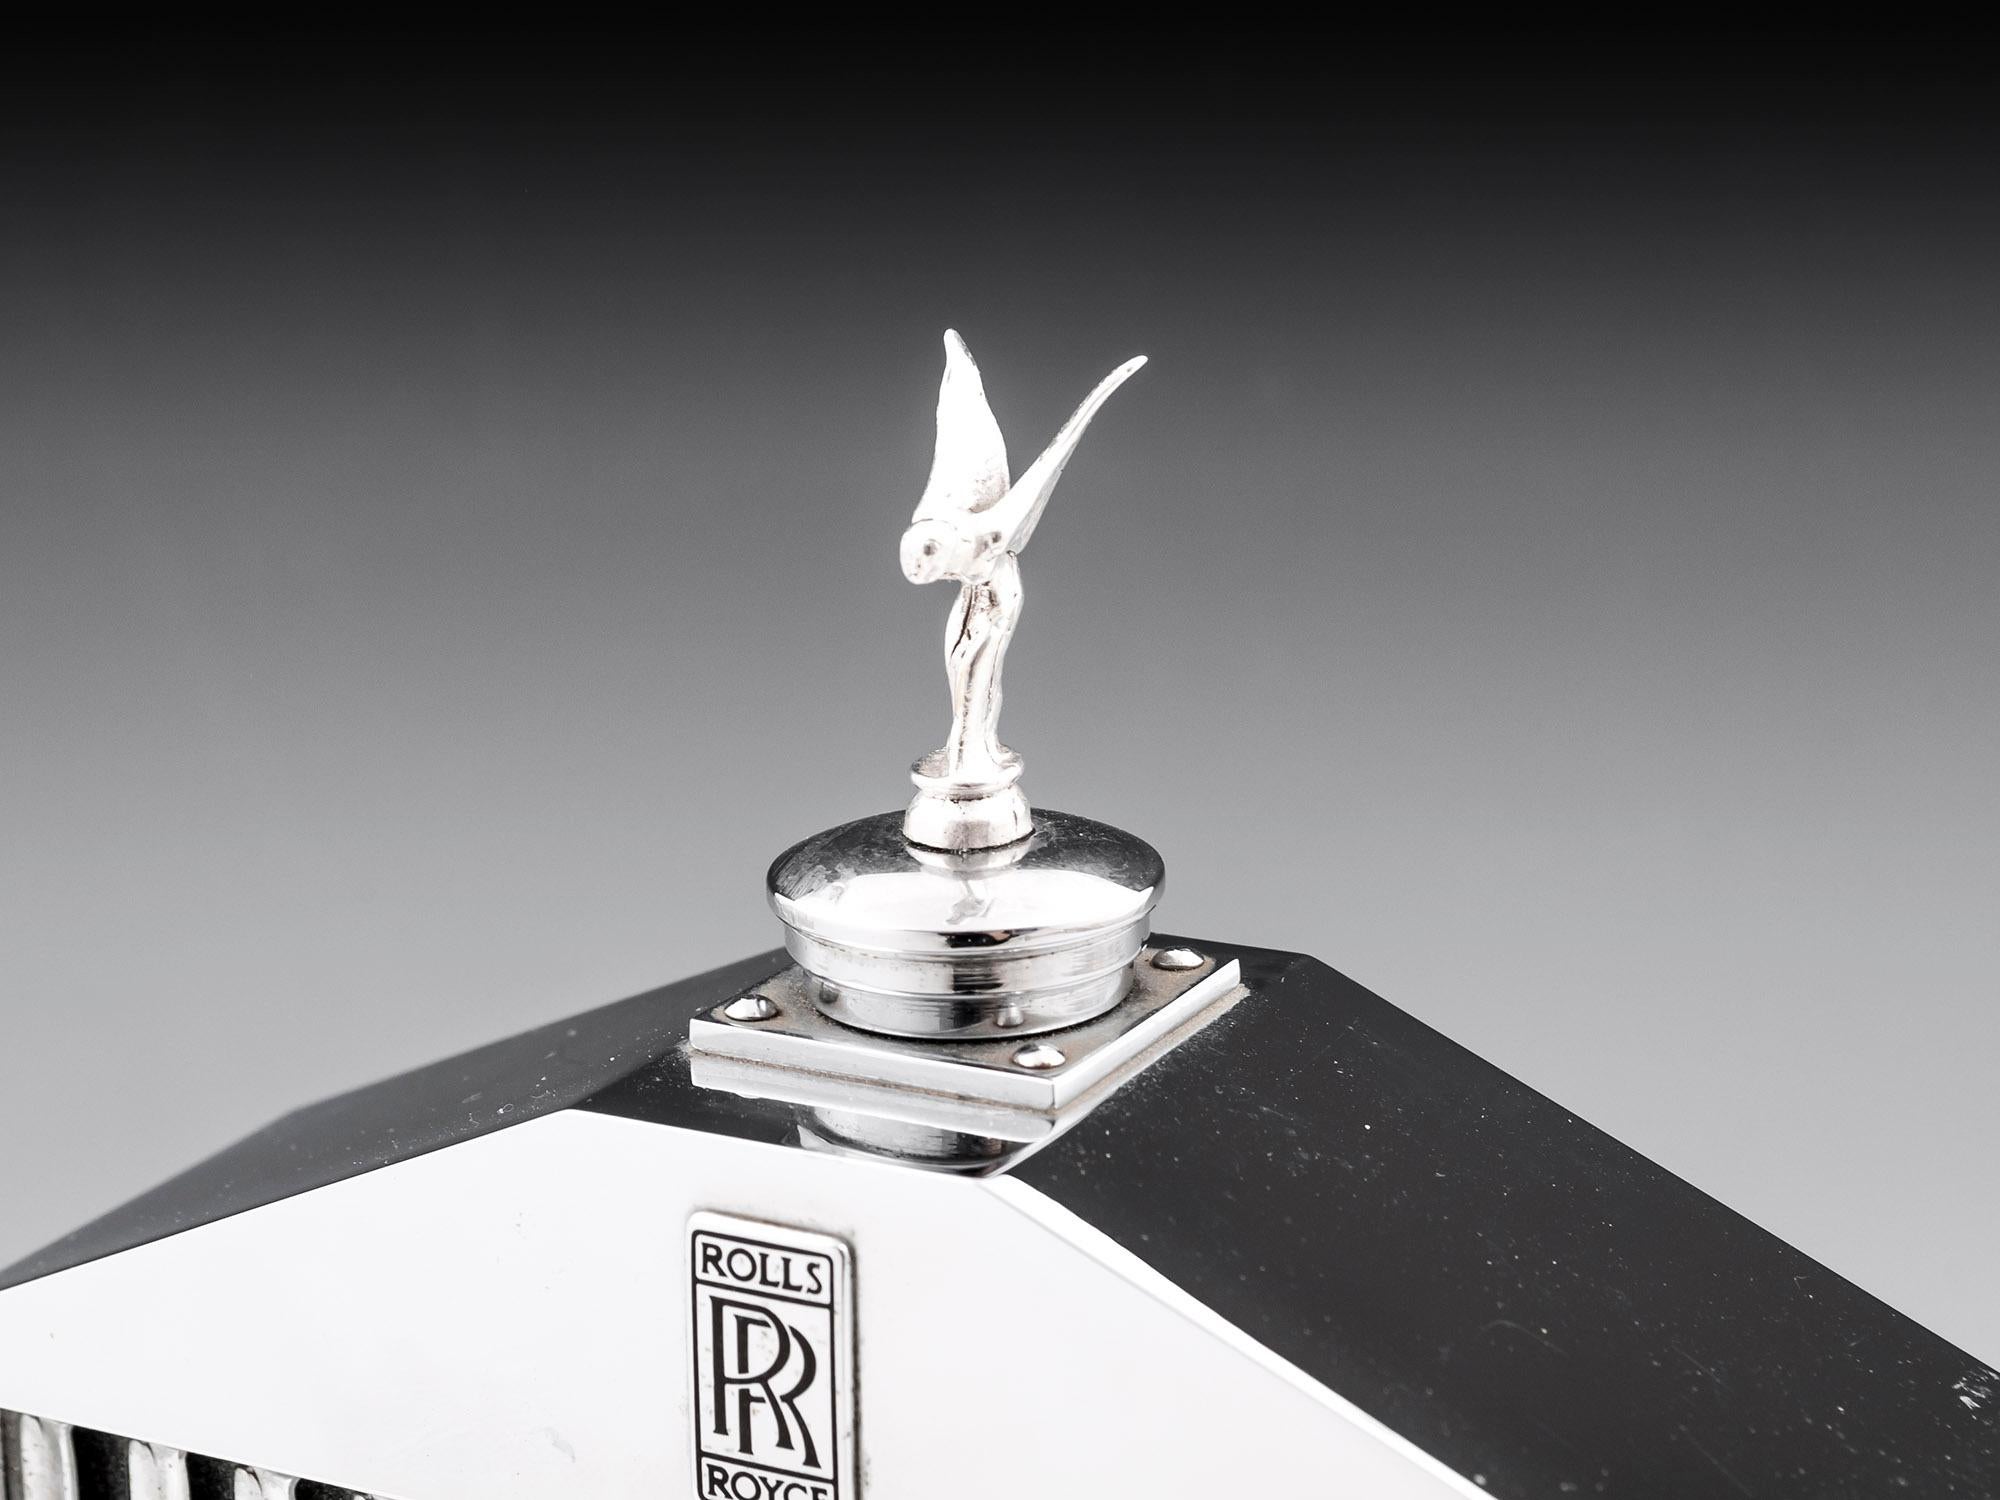 Glass Rolls Royce Radiator Decanter by Classic Stable, 20th Century